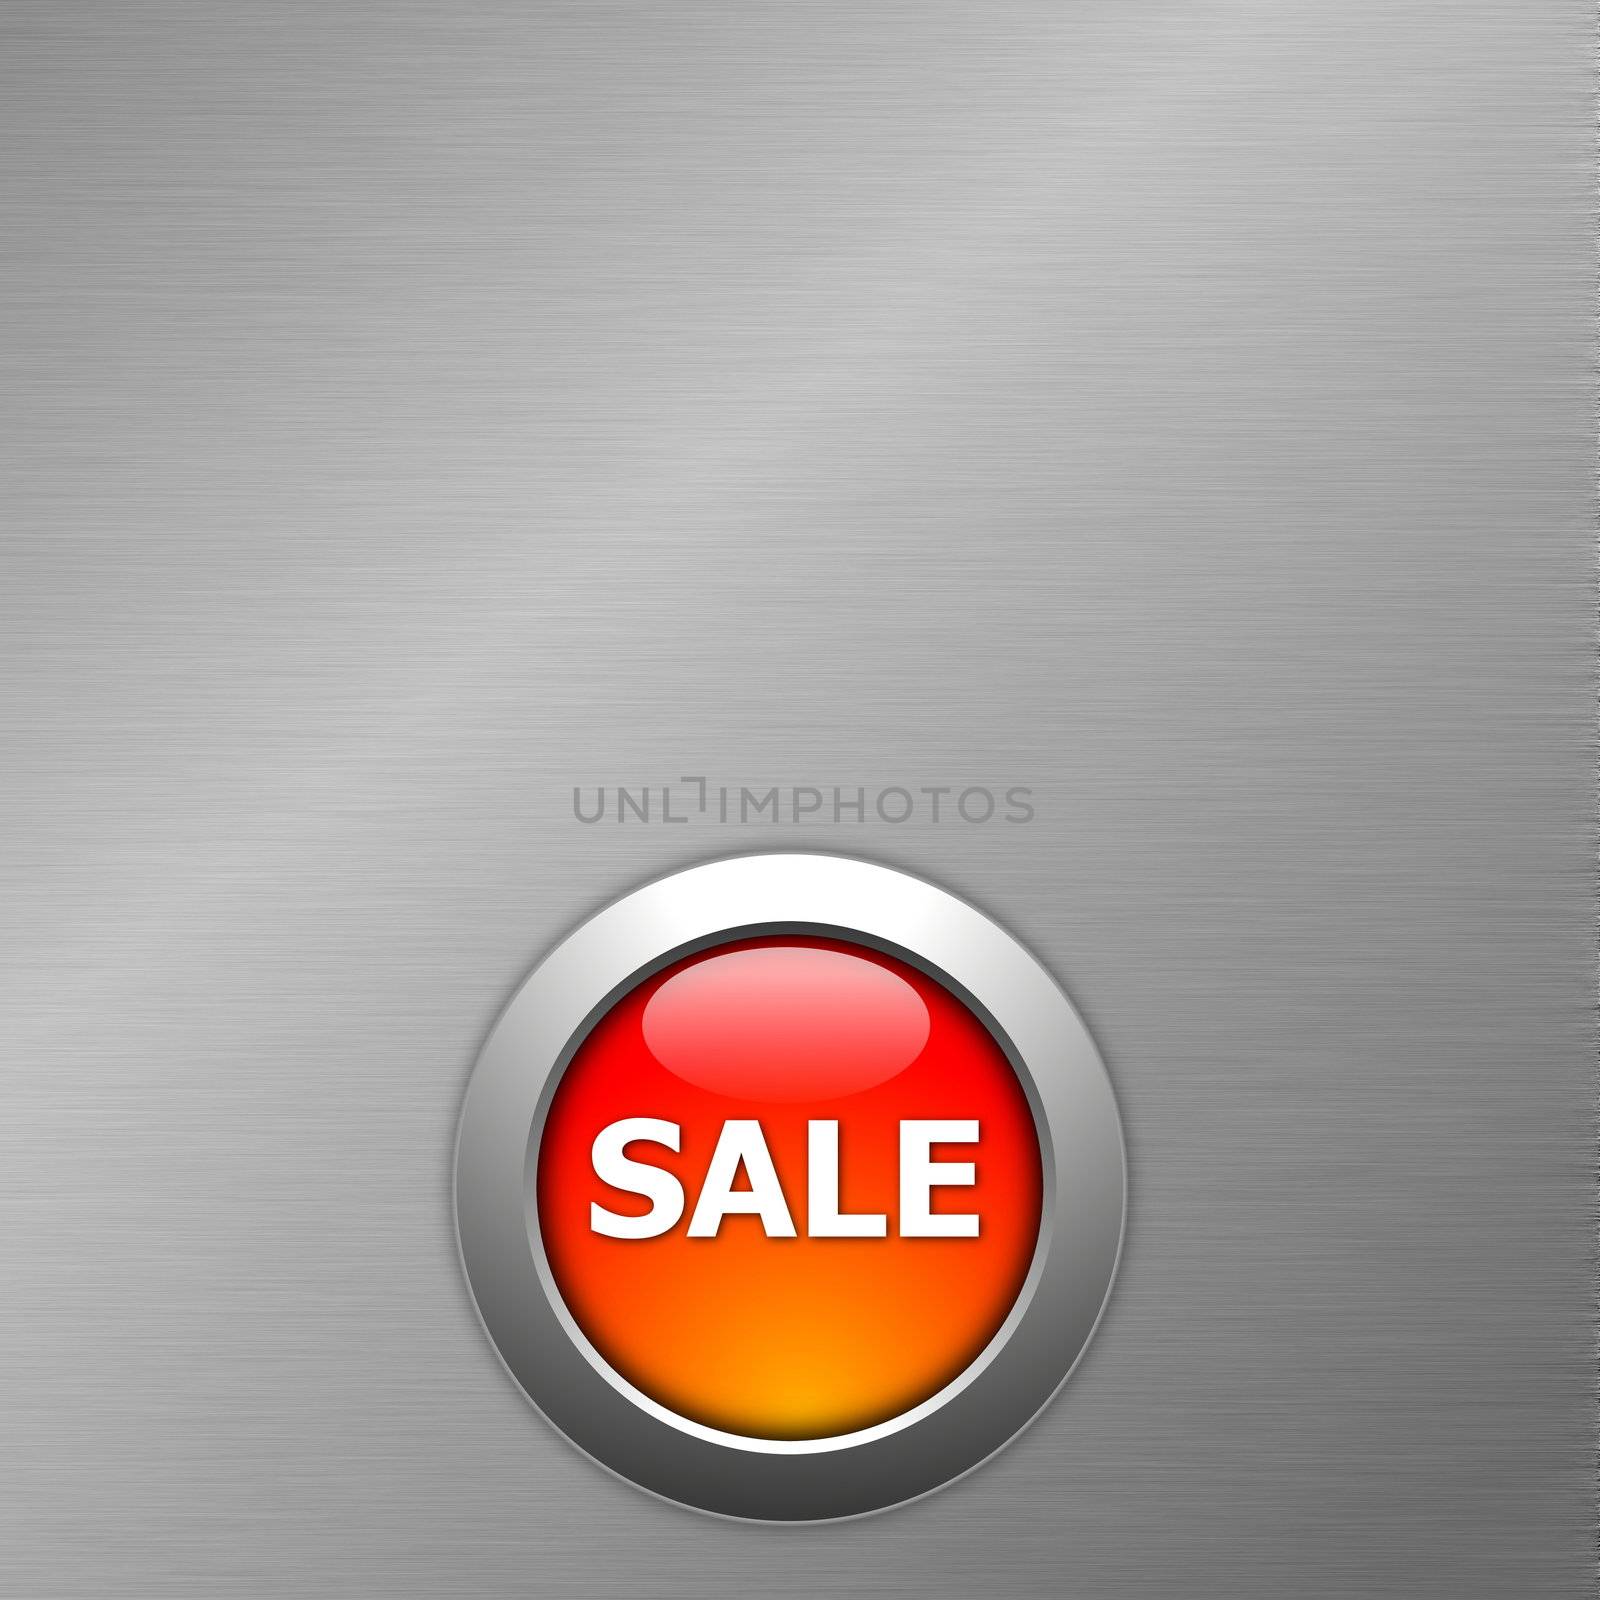 red sale button on a metal background